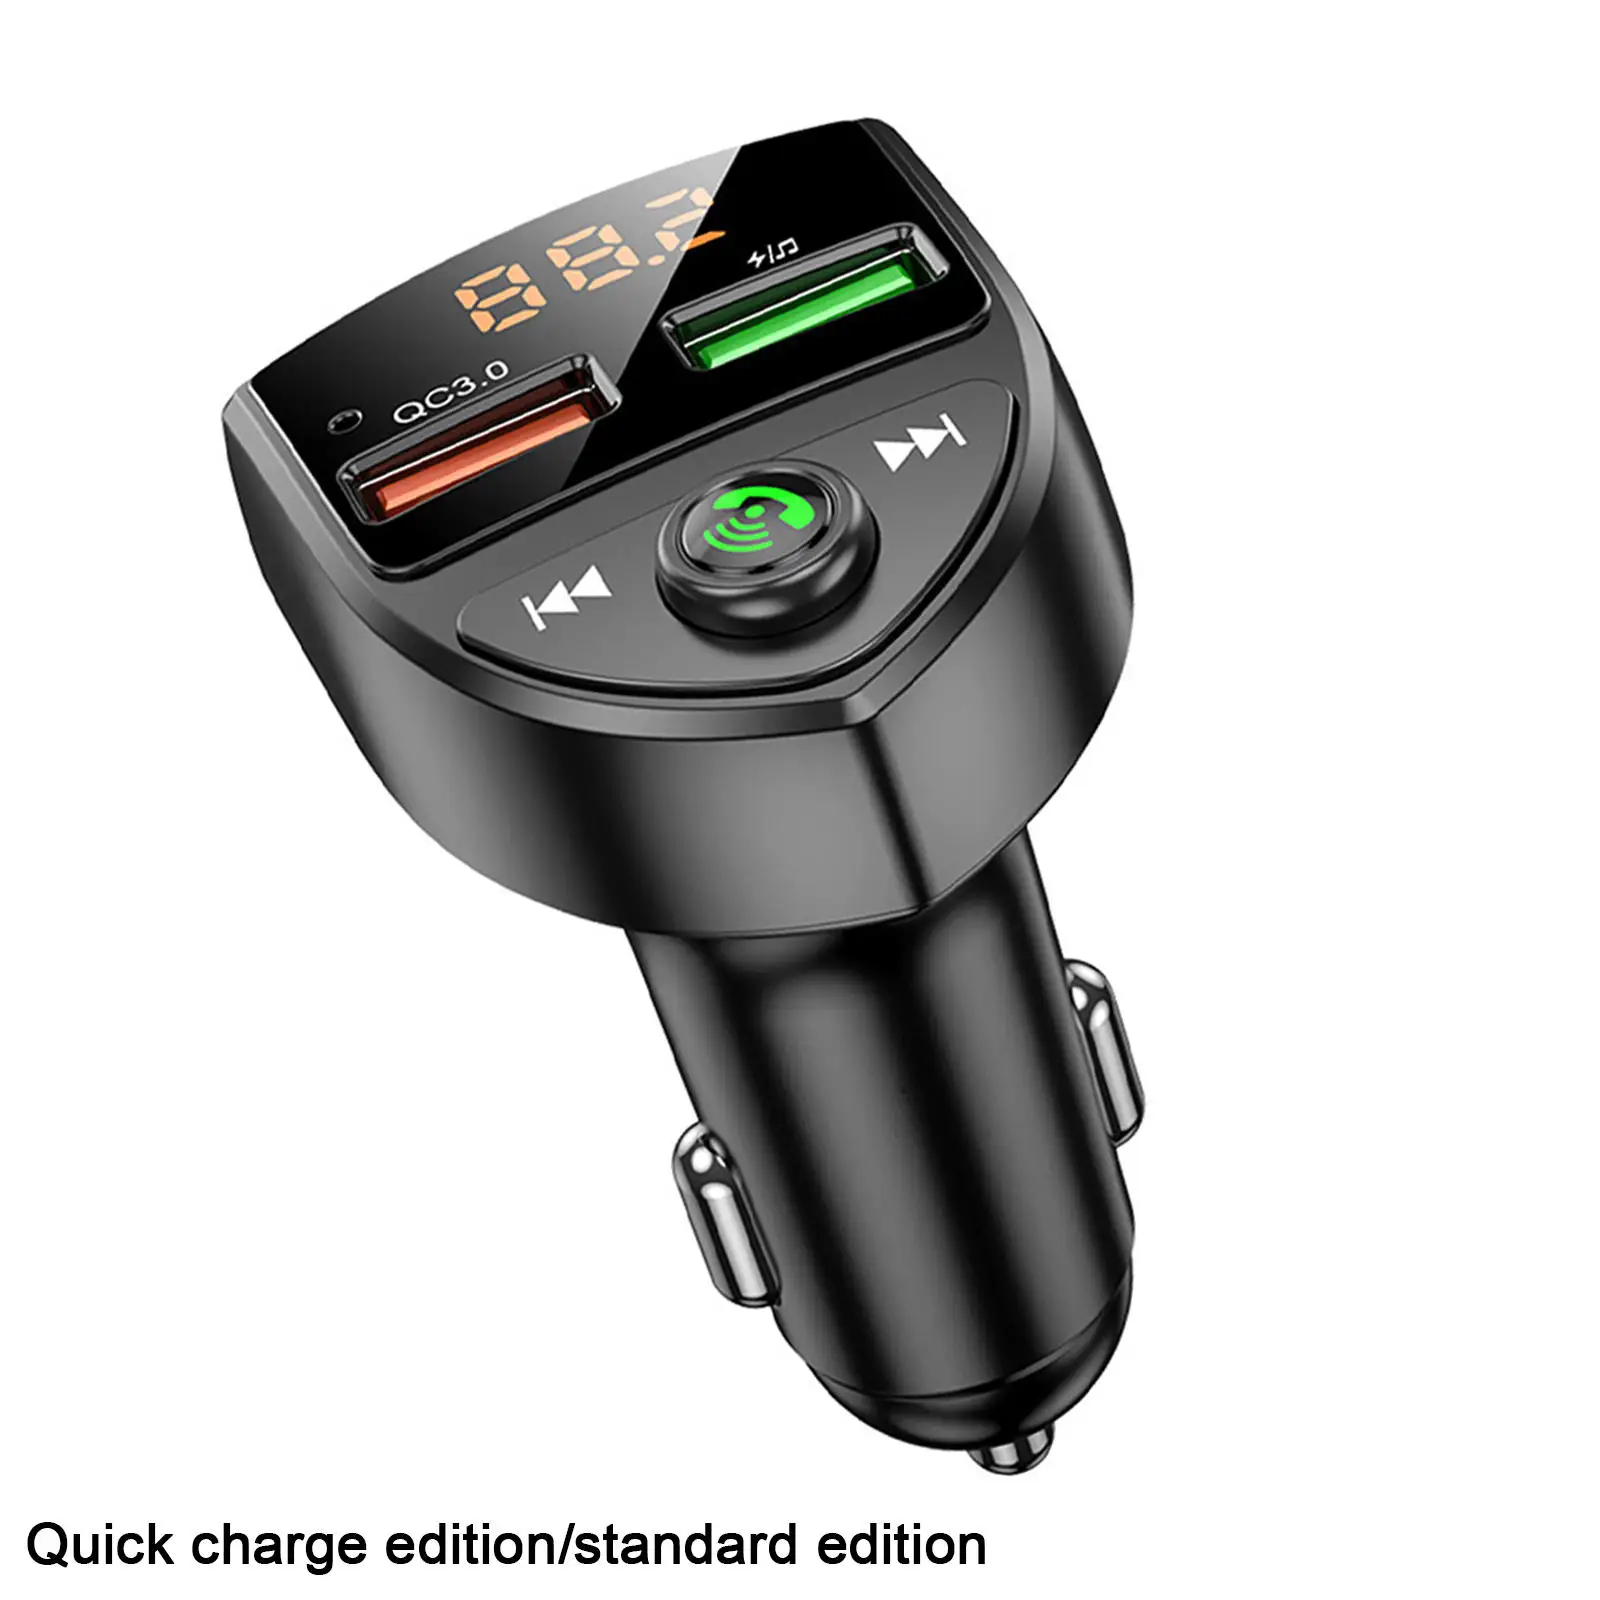 Wireless FM Transmitter USB QC3.0 Dual USB Charger MP3 Player TF Card Voltage Display